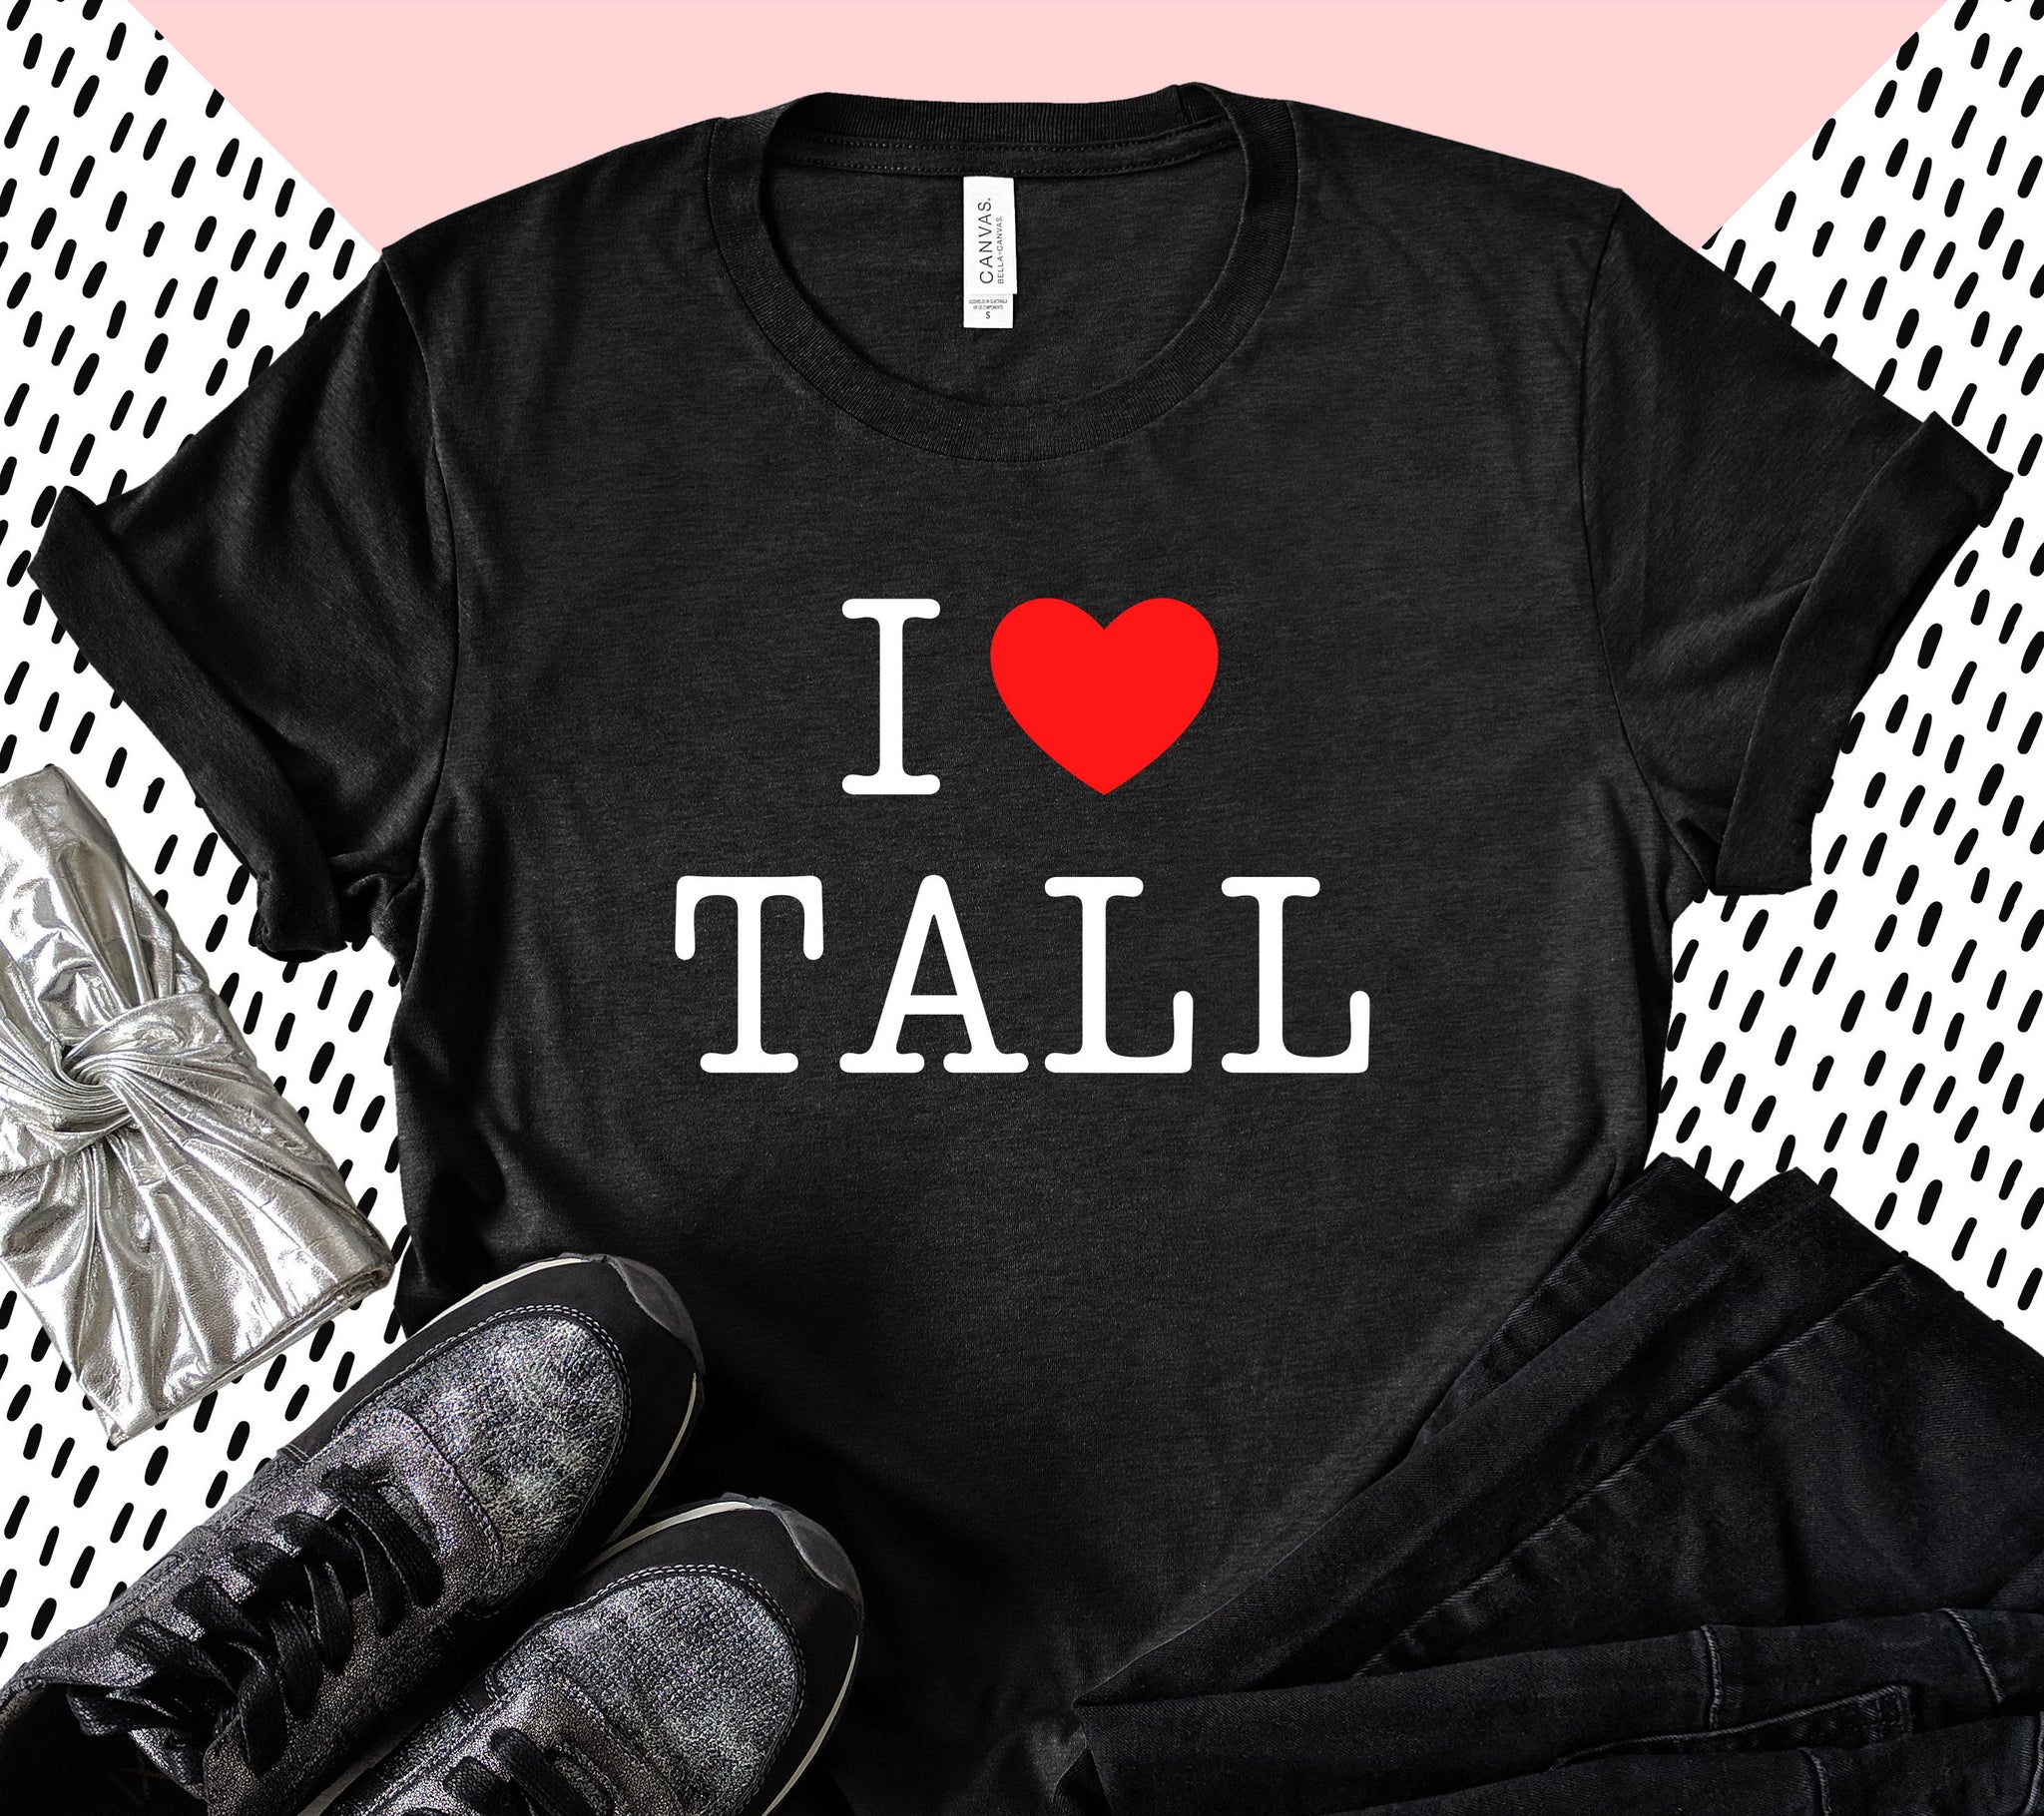 Bella + Canvas "I Heart Tall" graphic tee from Tall Reali-tees.